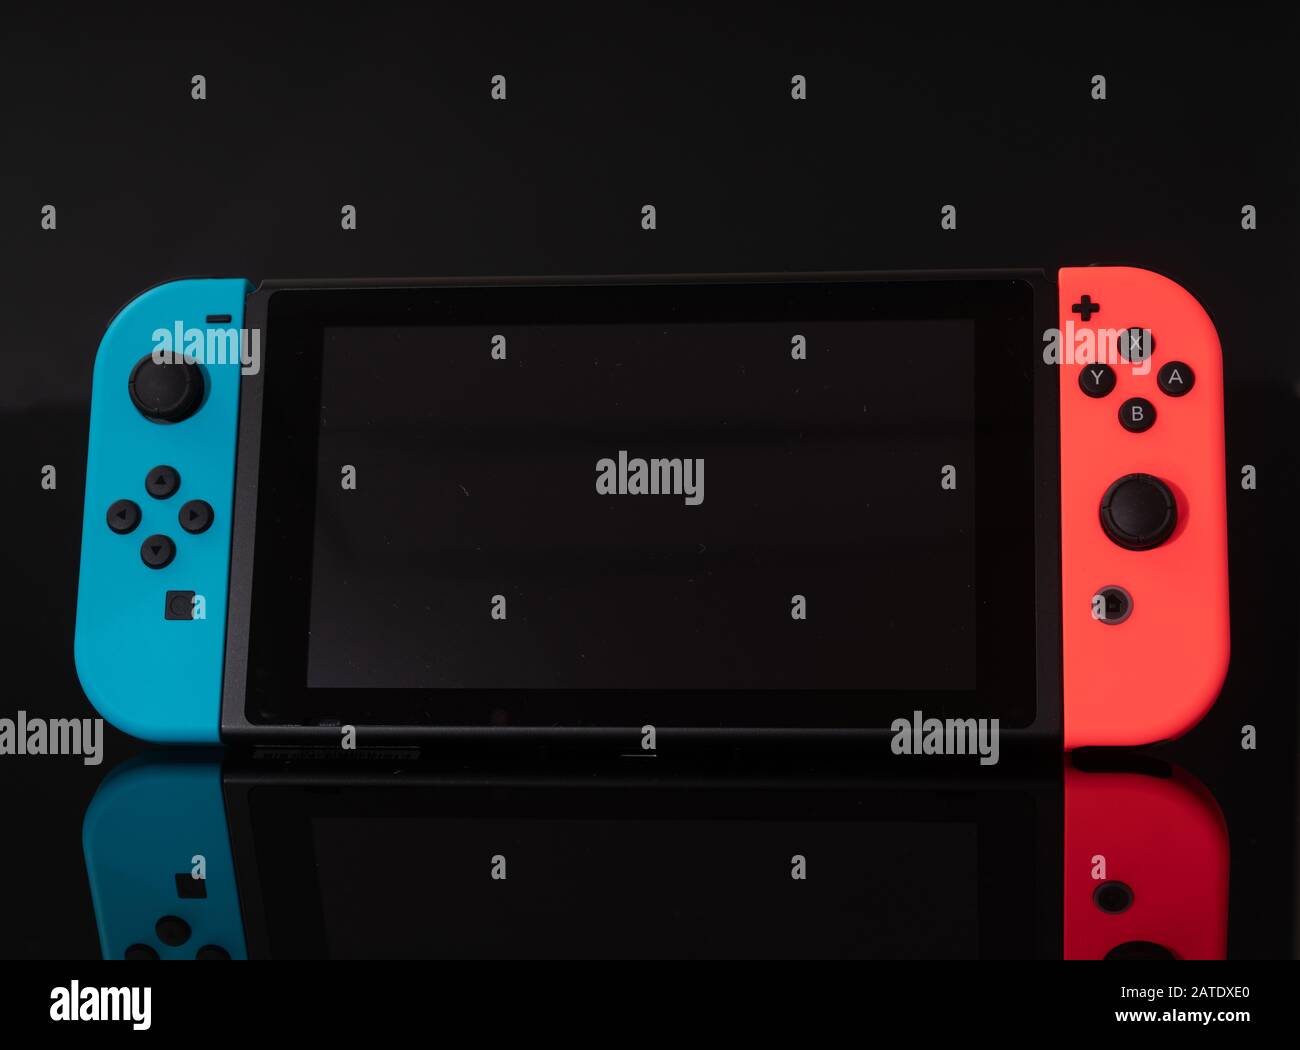 Nintendo Switch video game console developed by Nintendo, released on March  3, 2017 on a black background. Germany, Berlin - June 30, 2019: Nintendo S  Stock Photo - Alamy